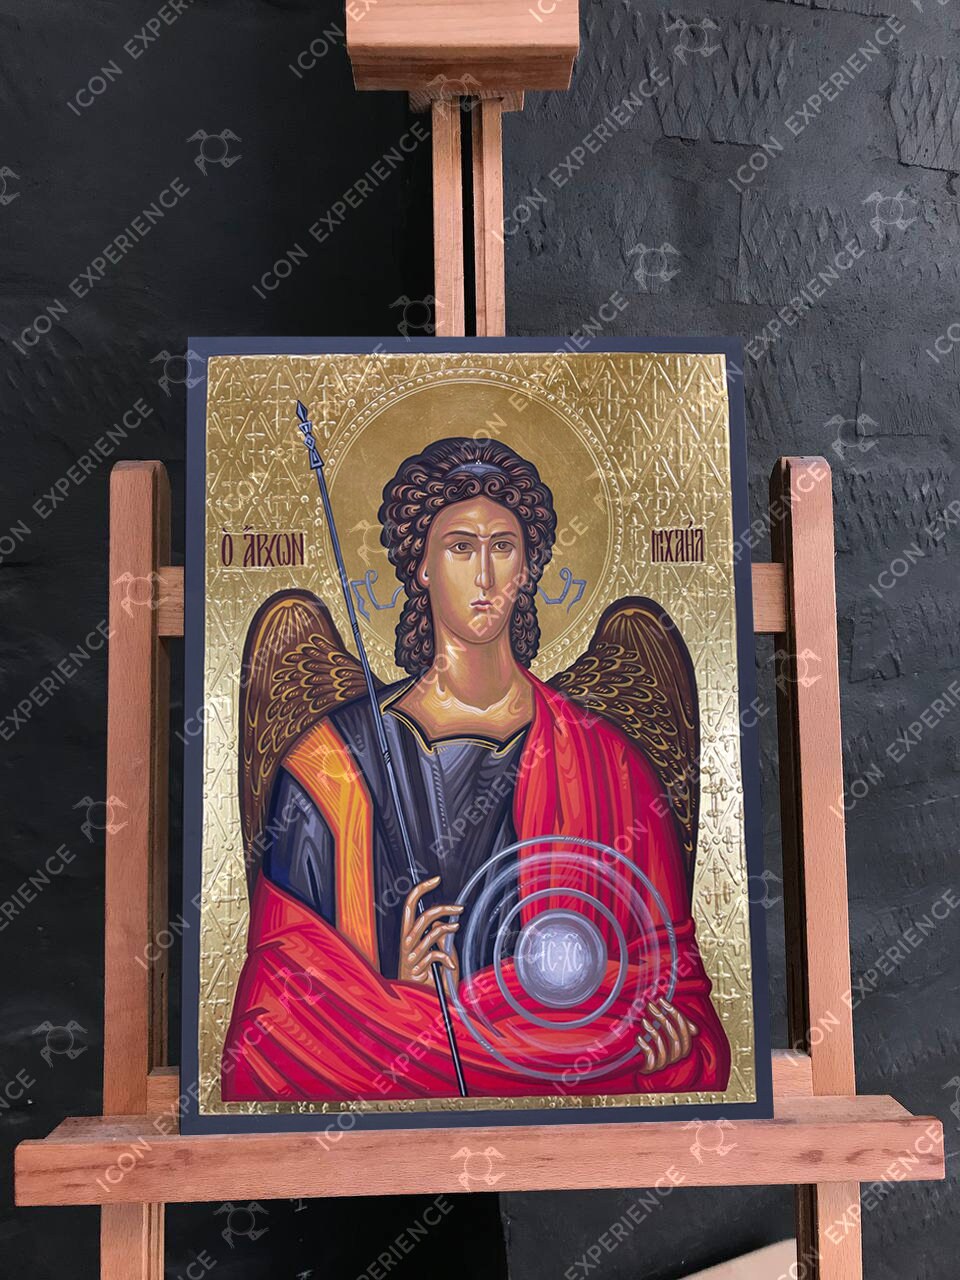 Saint Archangel Michael Handpainted Icon Byzantine Christian Painting Wall Hanging Home Decoration Guardian Angel Religious Gift Idea